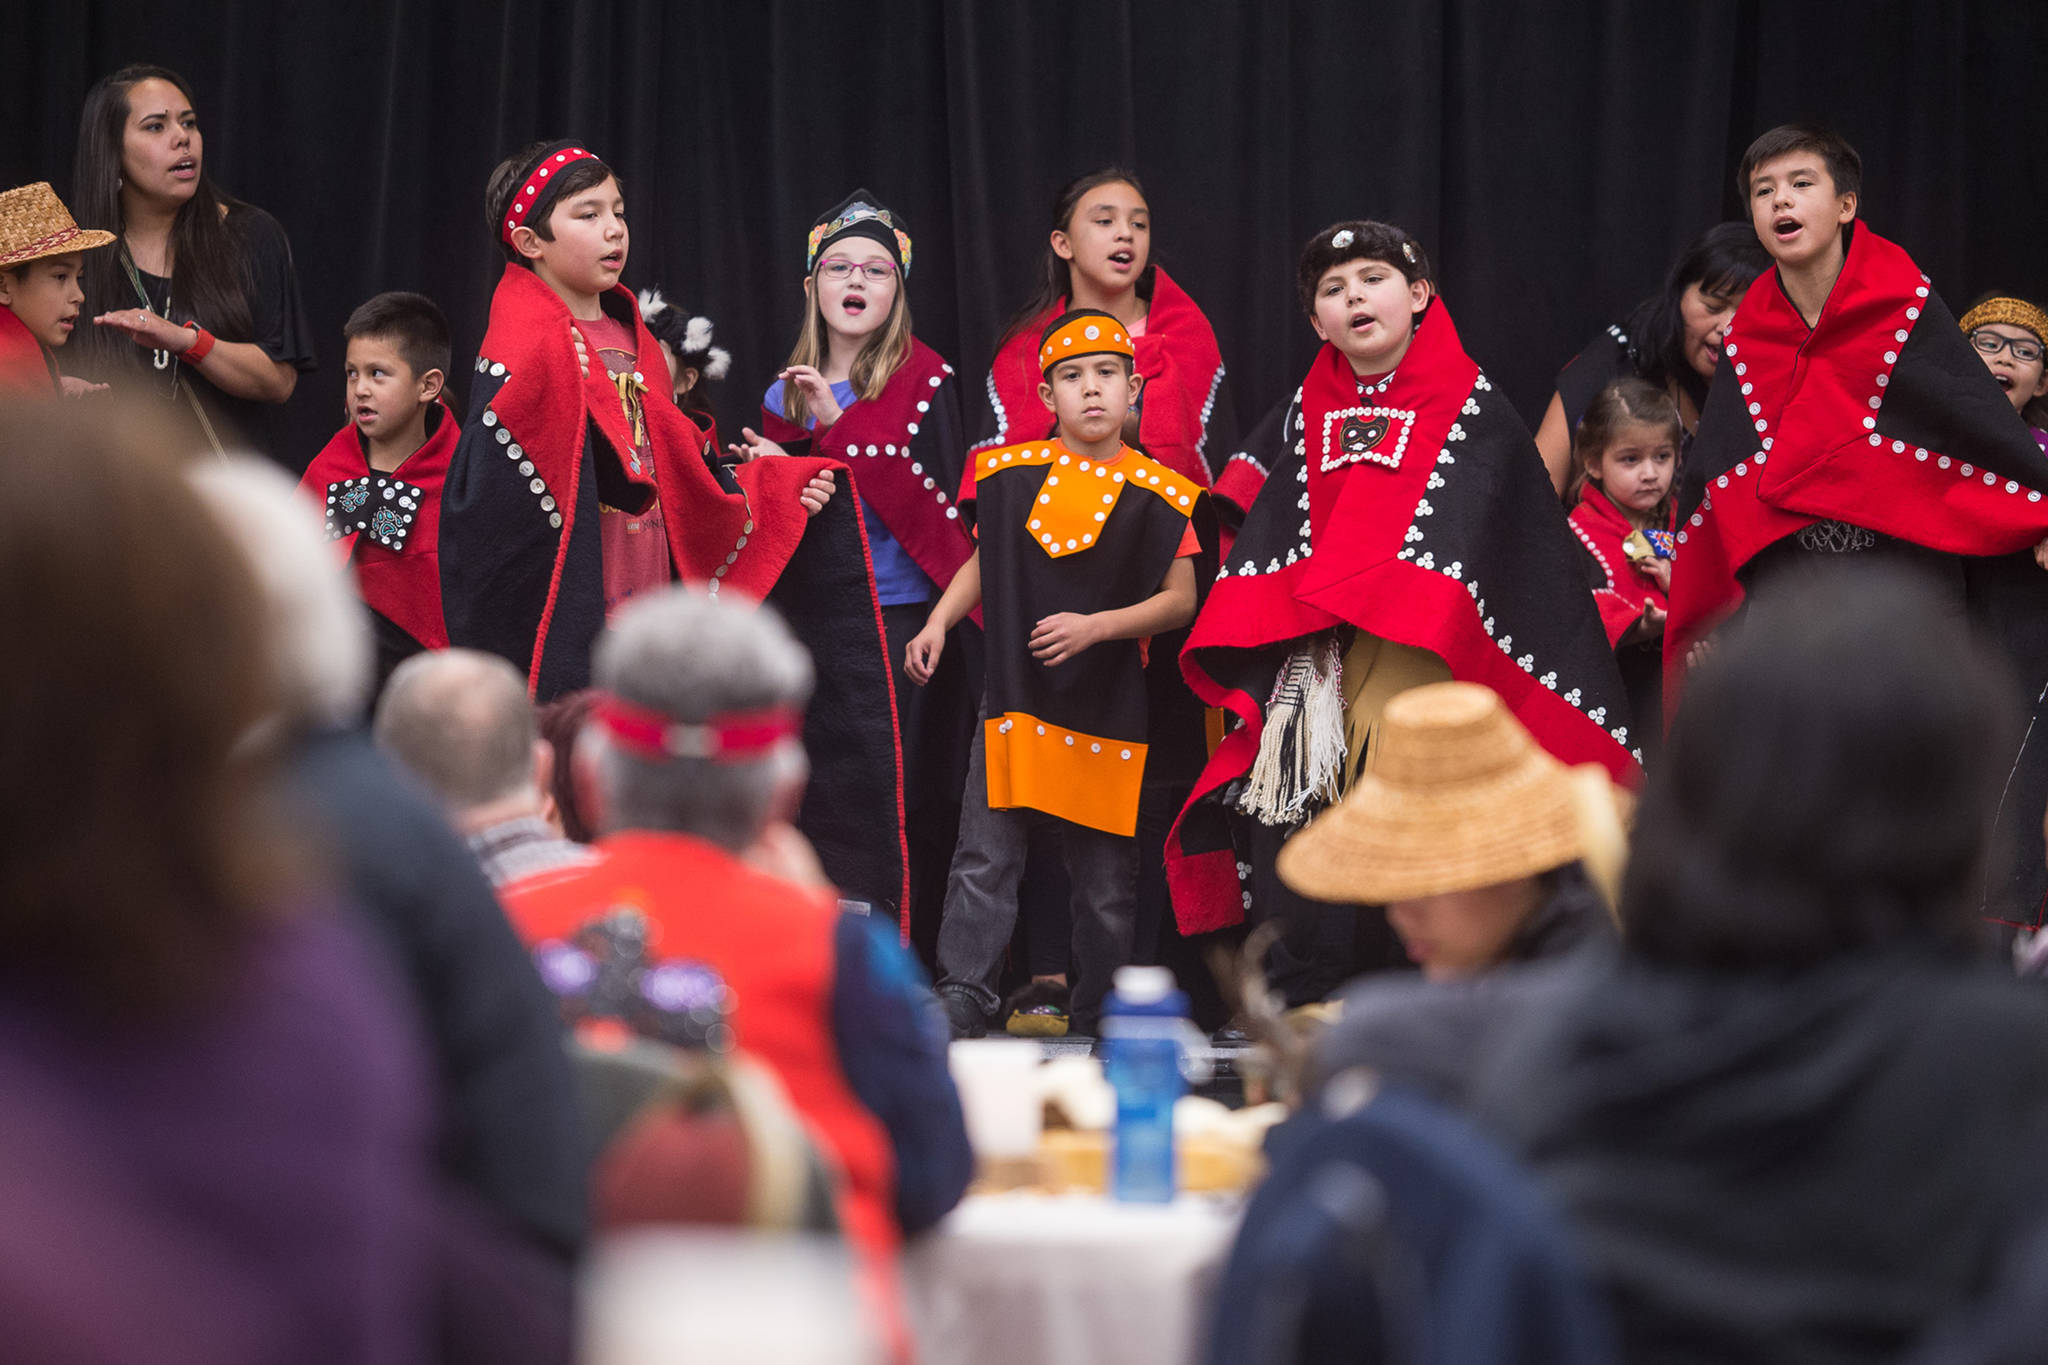 All Nations Children Dancers help Juneau residents celebrate Indigenous Peoples Day at Elizabeth Peratrovich Hall on Monday, Oct. 9, 2017. (Michael Penn | Juneau Empire File)